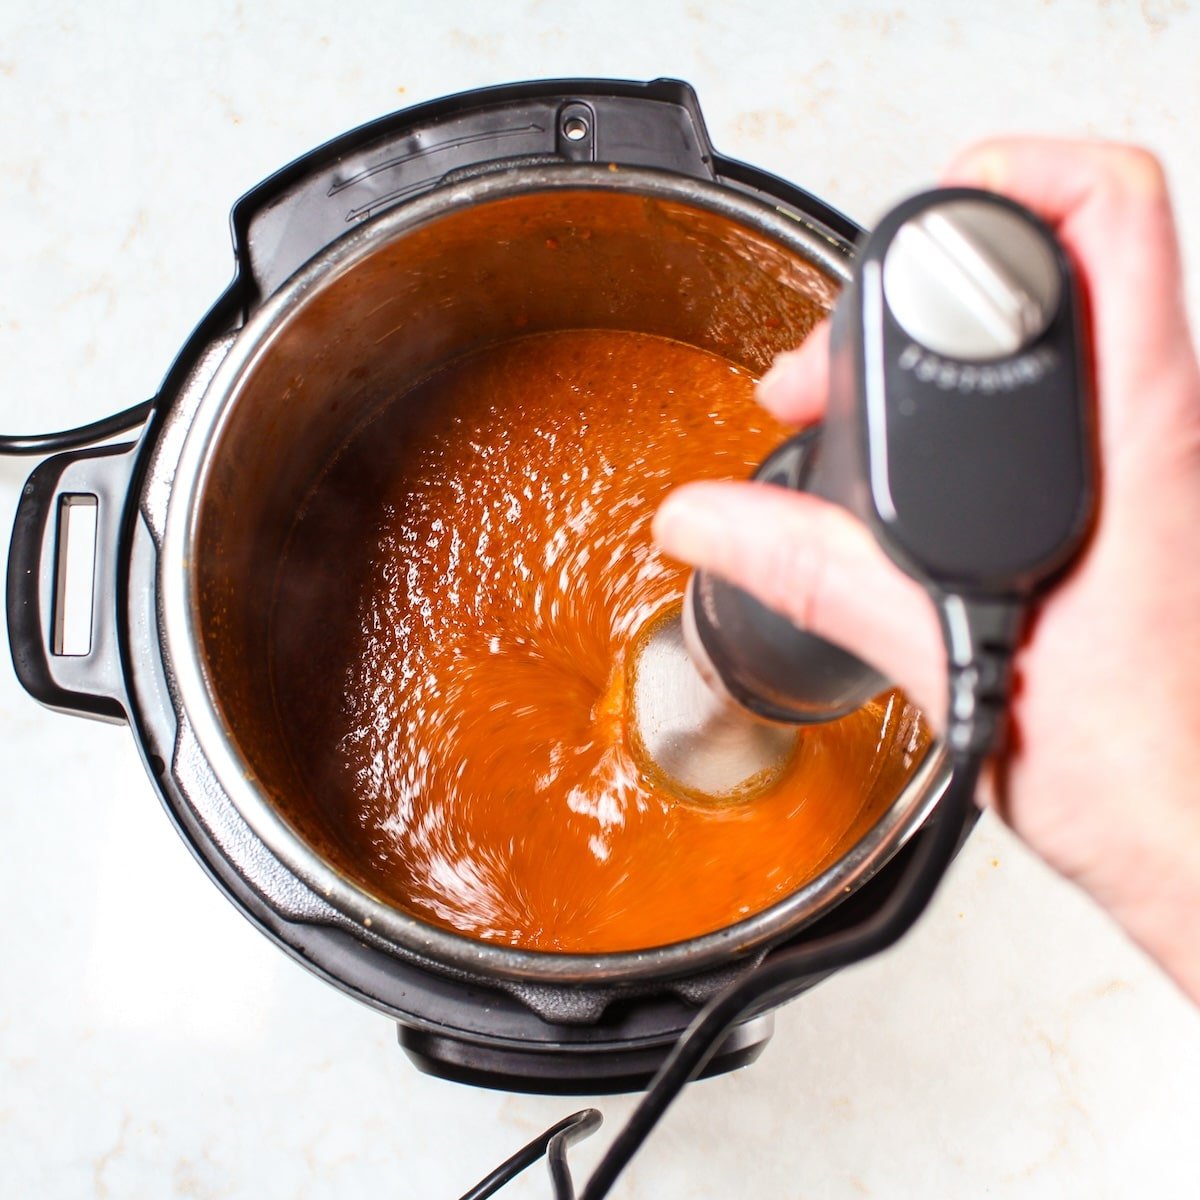 An immersion blender pureeing the sauce.